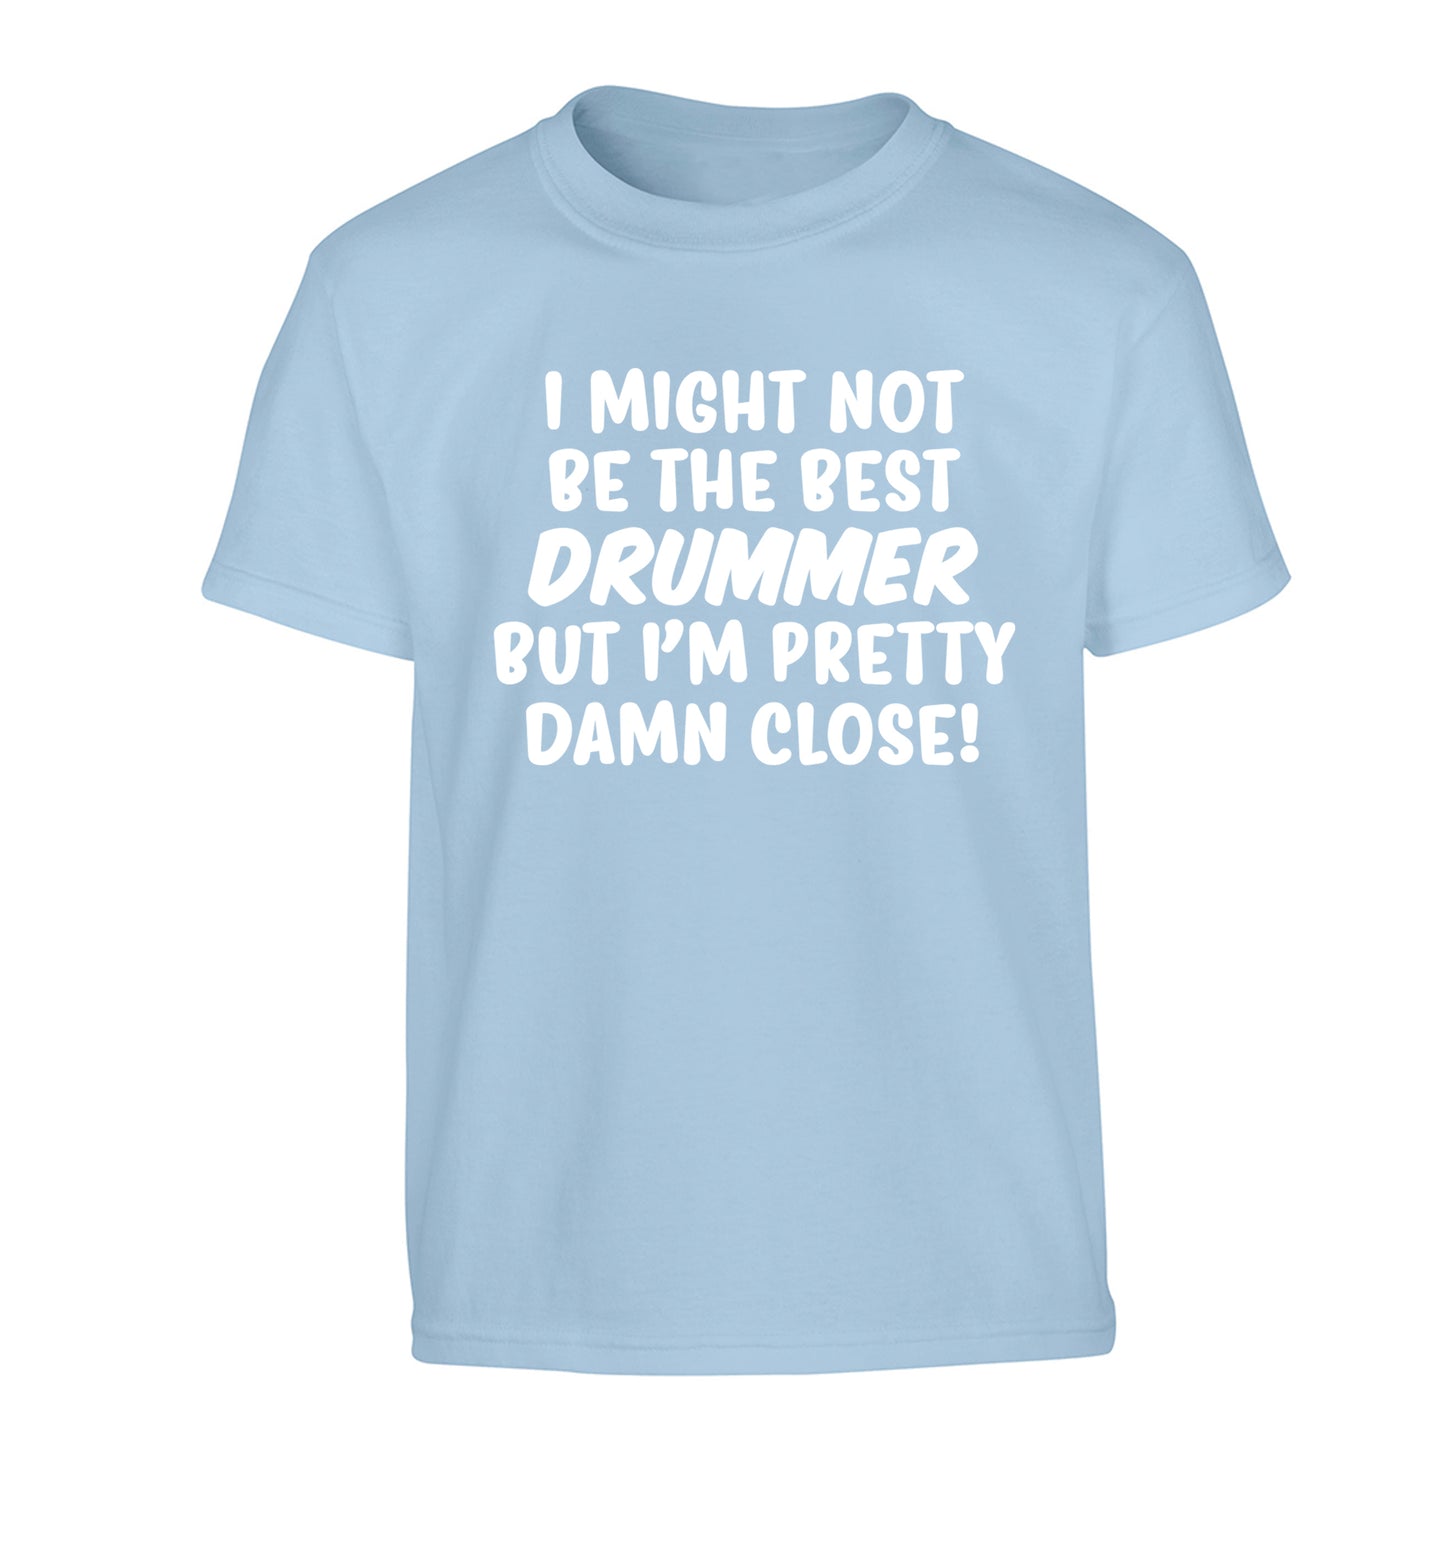 I might not be the best drummer but I'm pretty close! Children's light blue Tshirt 12-14 Years